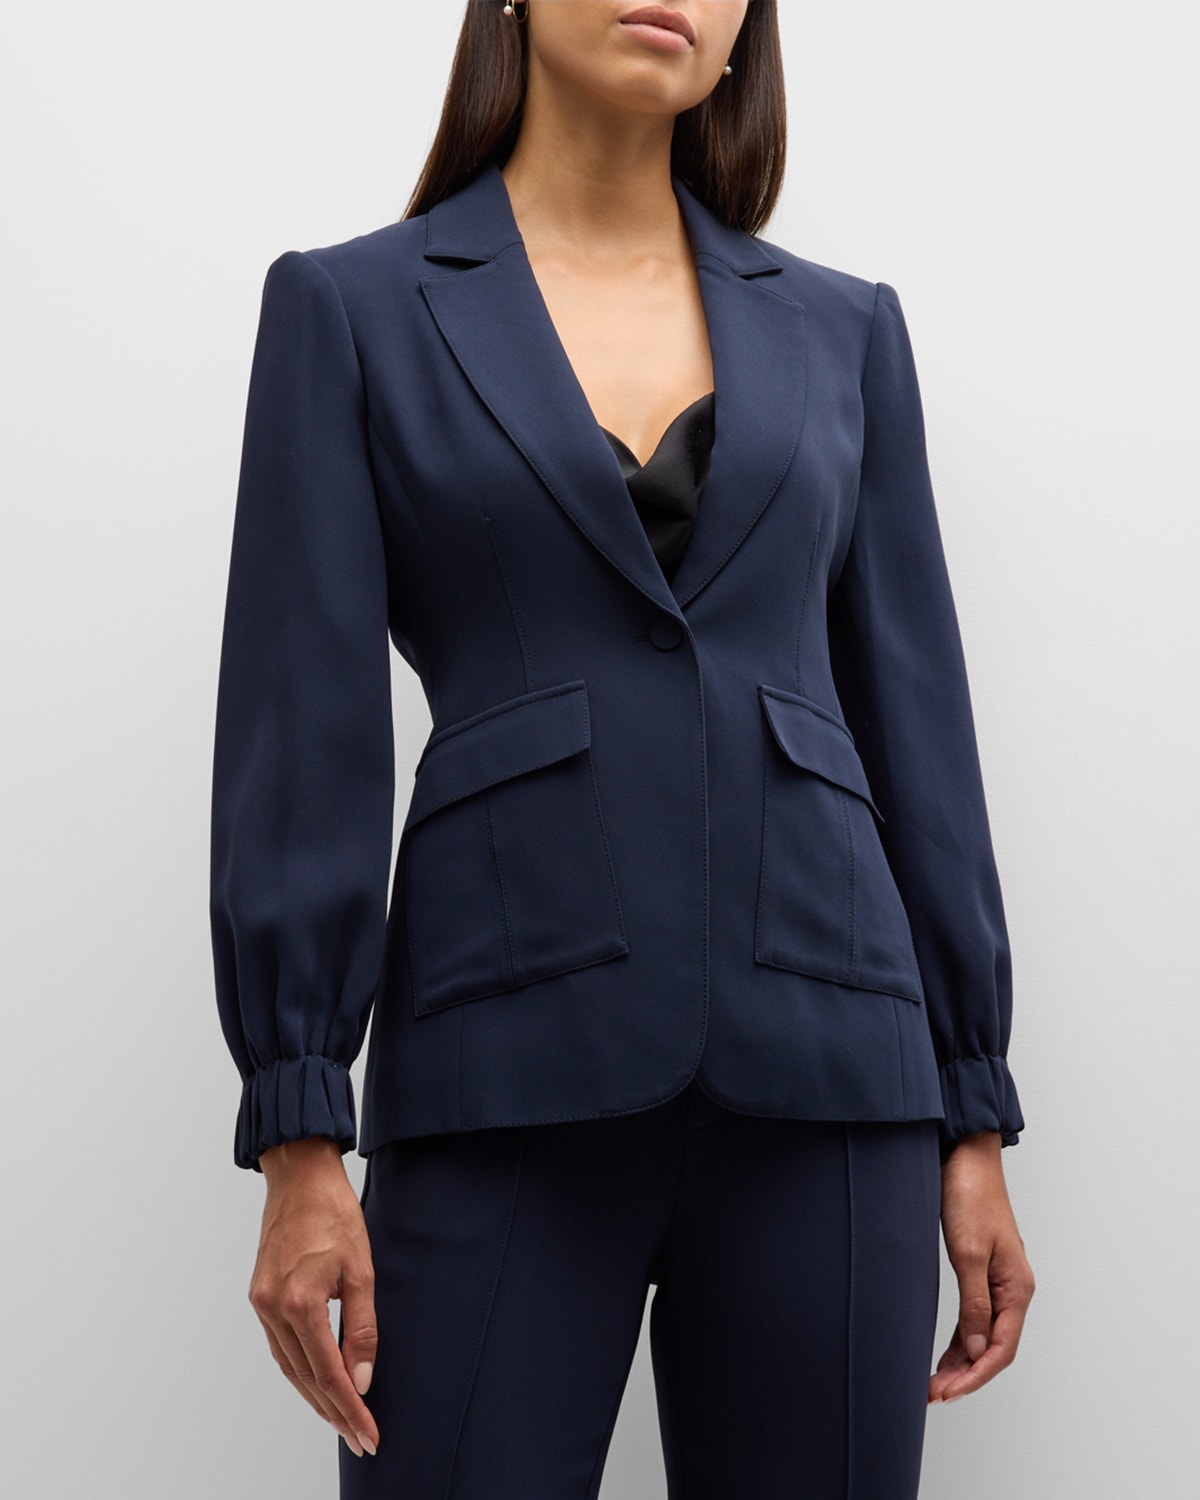 CINQ À SEPT TABITHA FRILL-CUFF CREPE JACKET WITH CARGO POCKETS